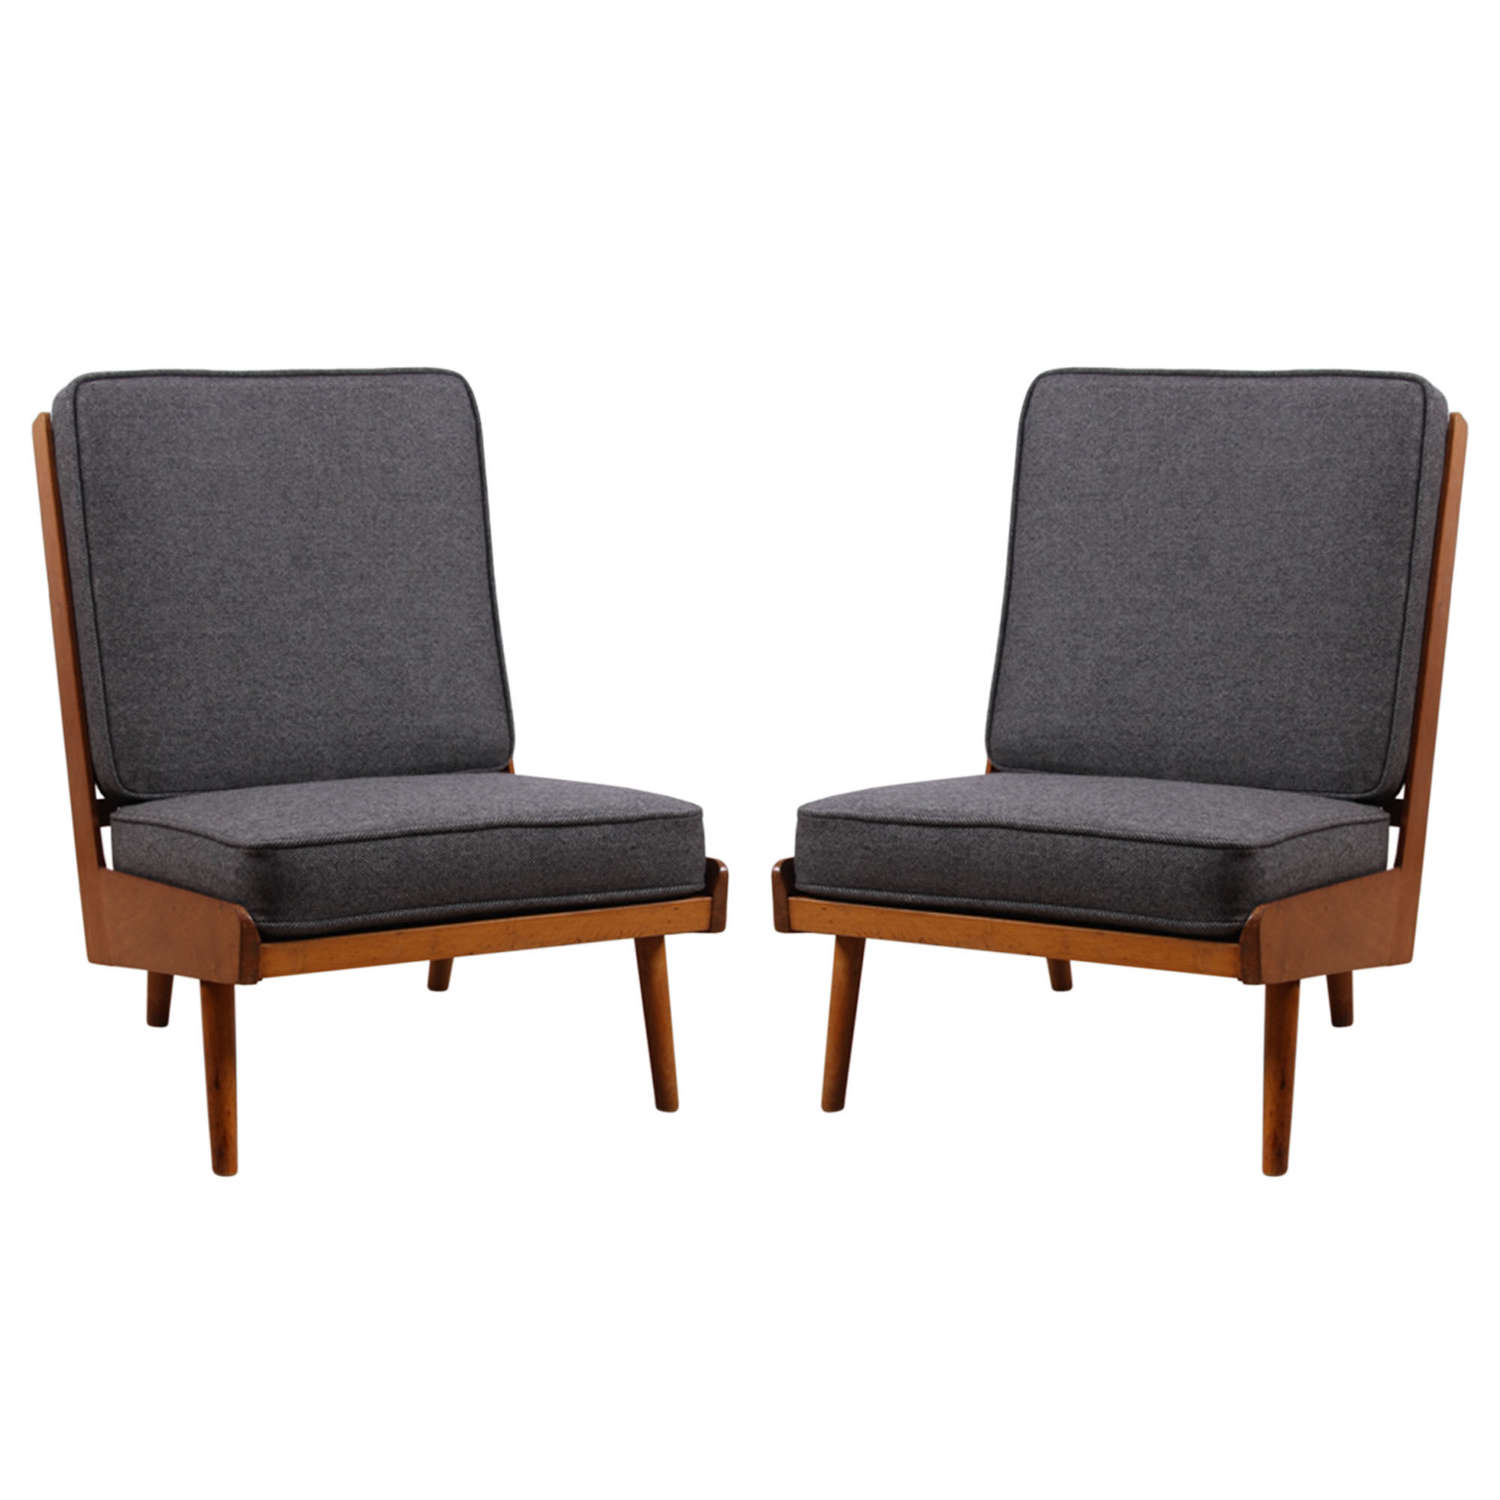 Pair of 1950s Robin Day Chairs